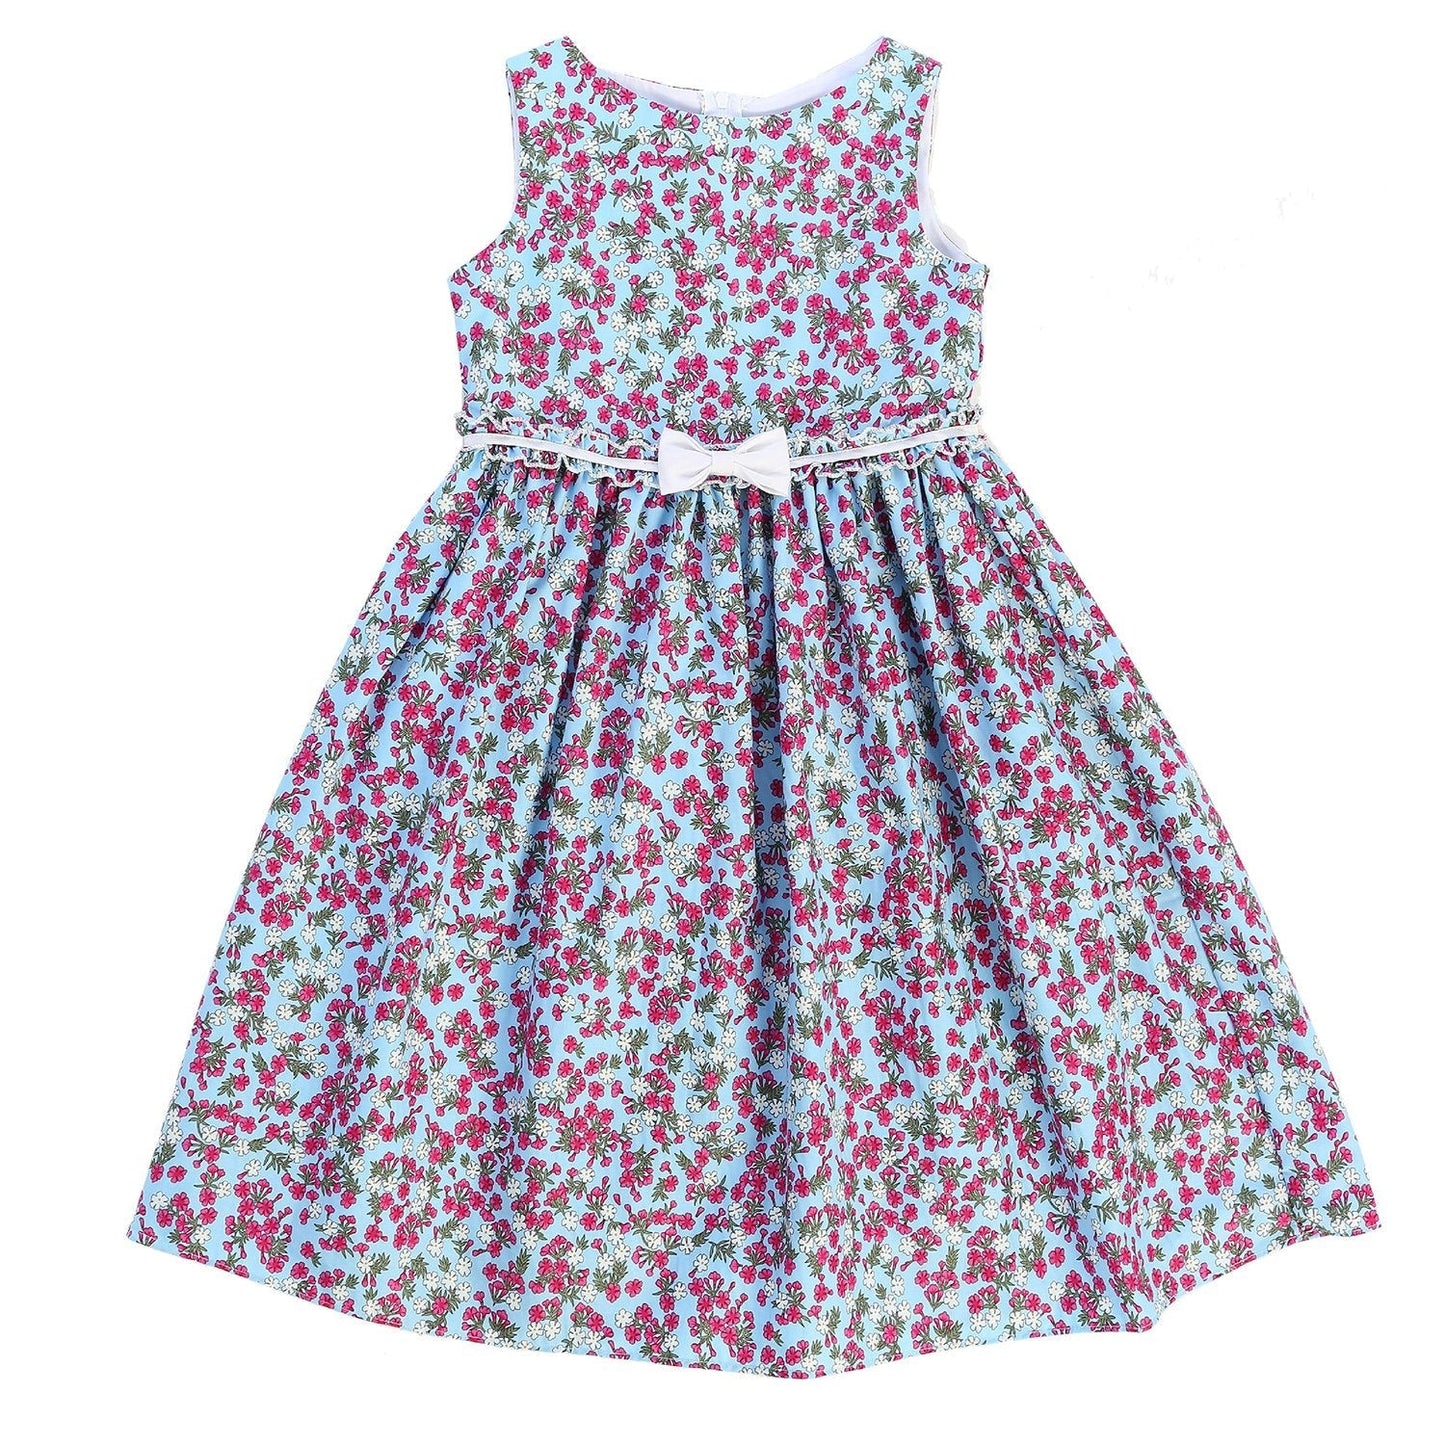 Dress - Ditzy Floral Print Cotton Dress With Bow